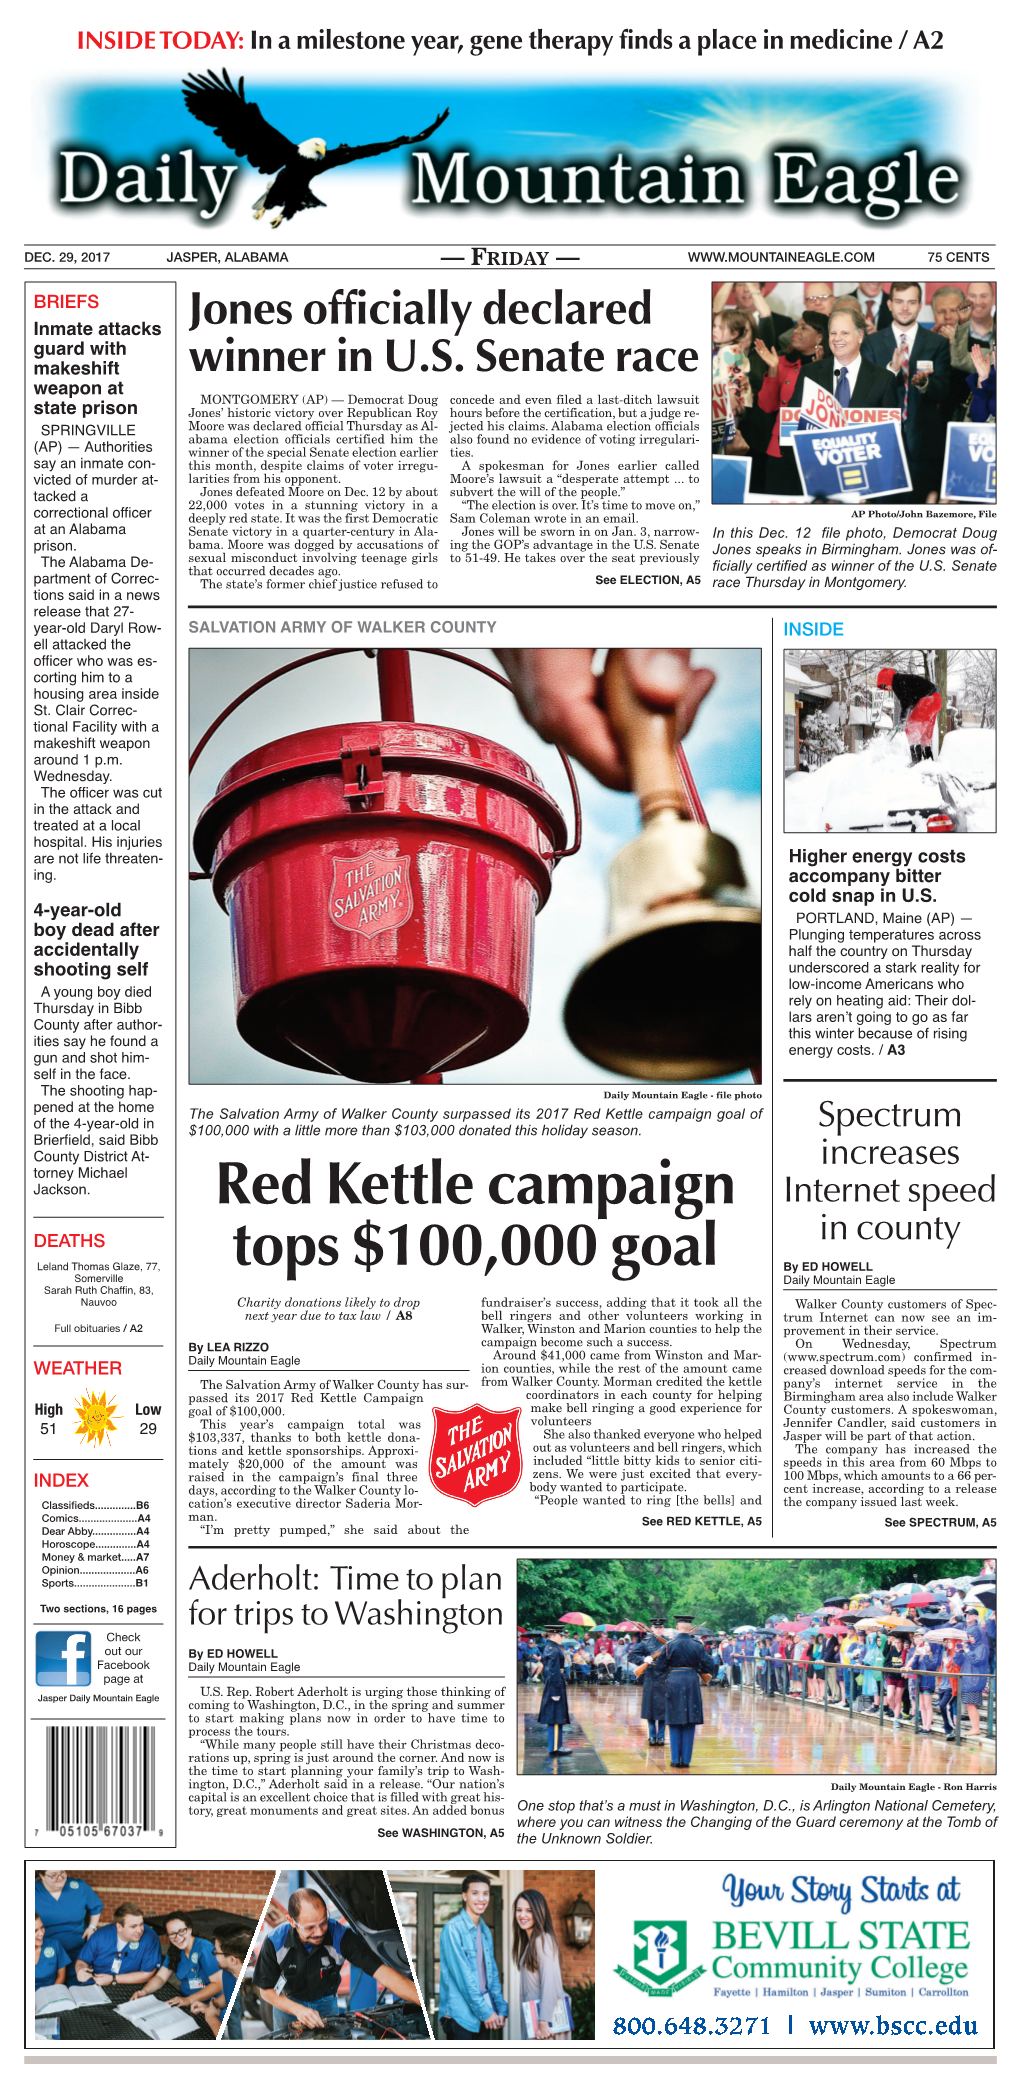 Red Kettle Campaign Tops $100,000 Goal